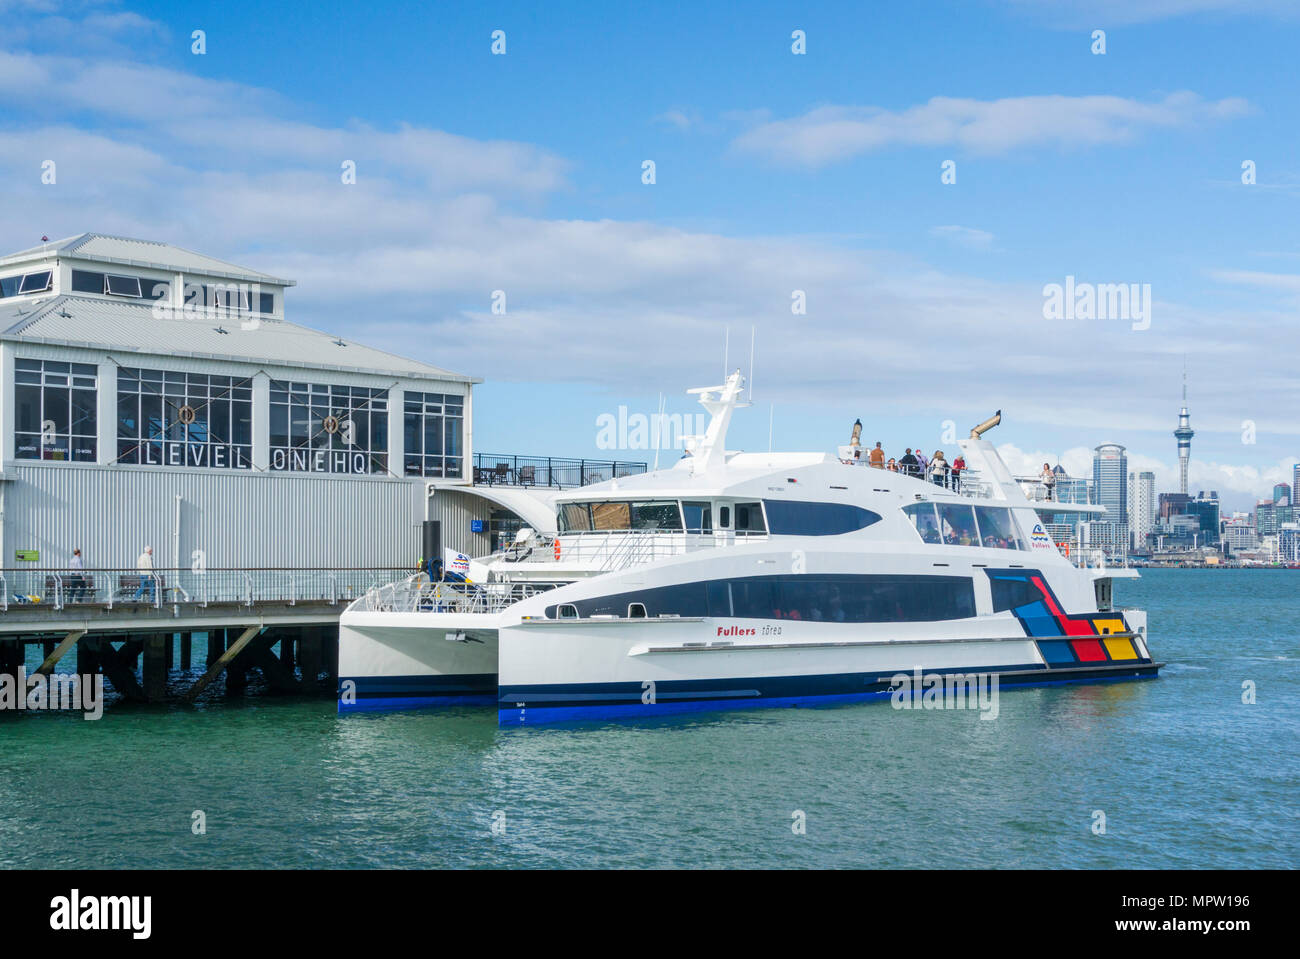 new zealand auckland new zealand north island auckland ferry departing from Devonport ferry terminal across to the cbd of the city of auckland nz Stock Photo